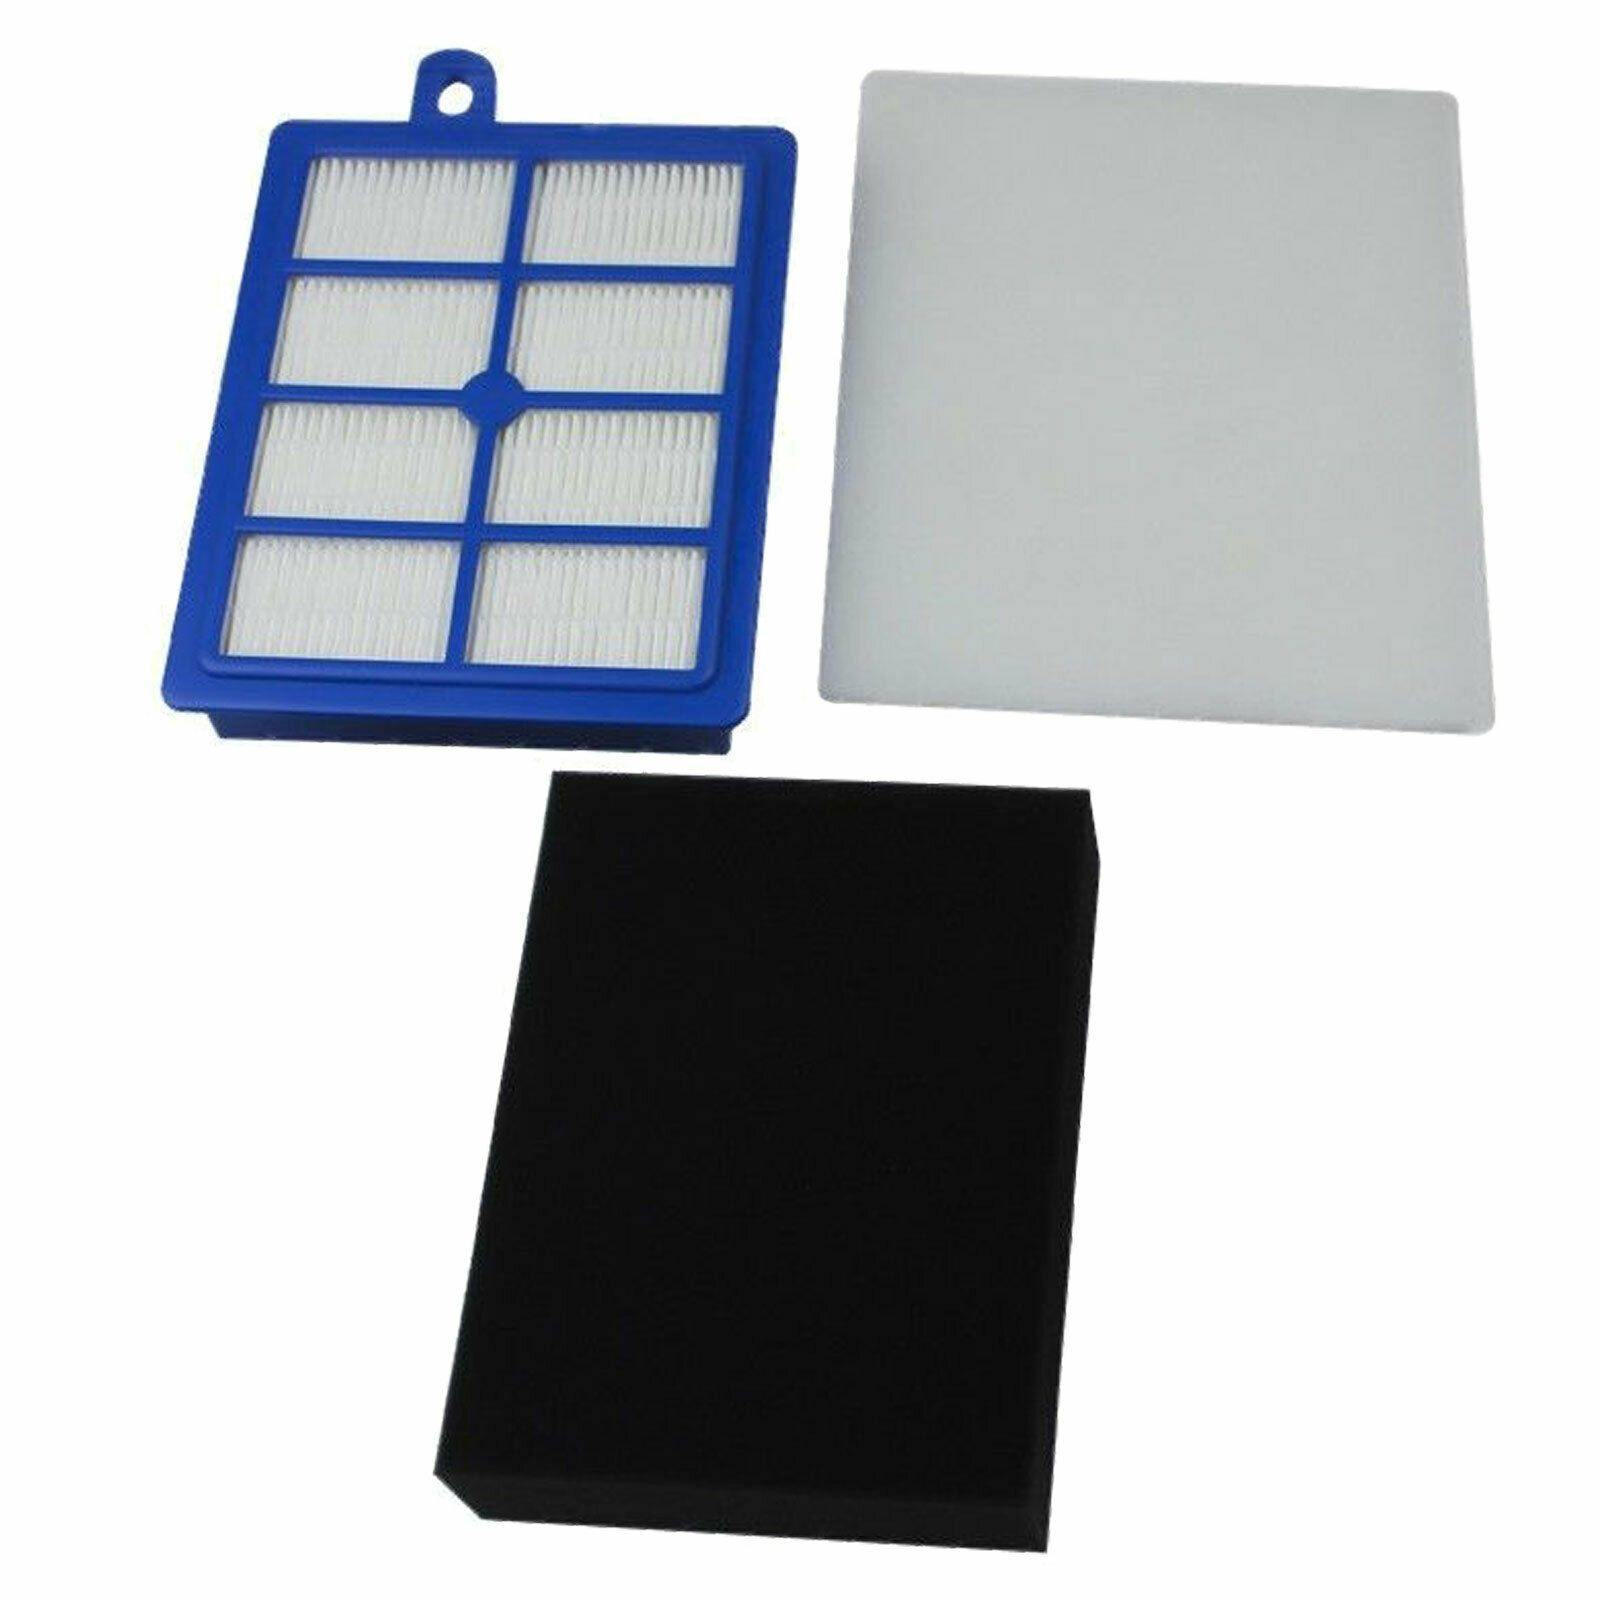 Hepa Filter Starter kit For Electrolux Super Cyclone XL ZSC6930 VCSK4 AEG Volta Sparesbarn